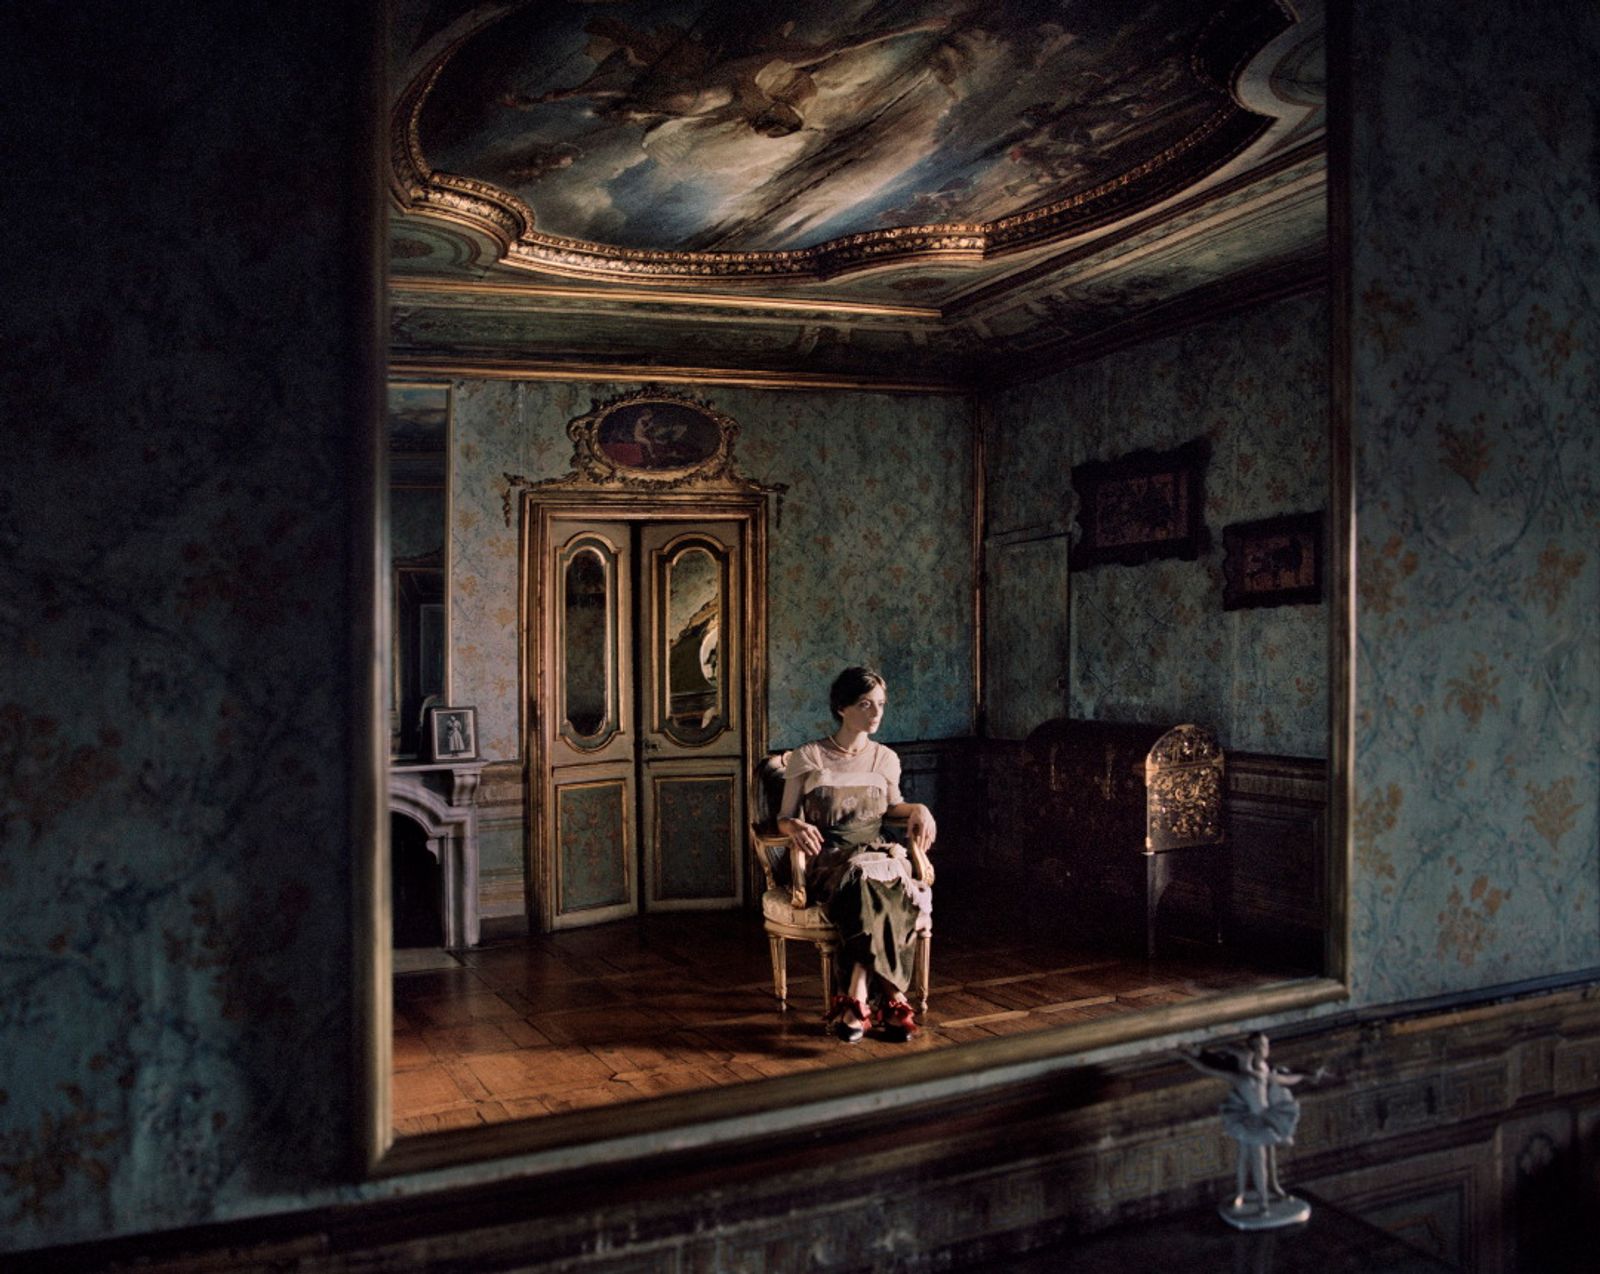 © Cristina Vatielli - Image from the Le donne di picasso photography project